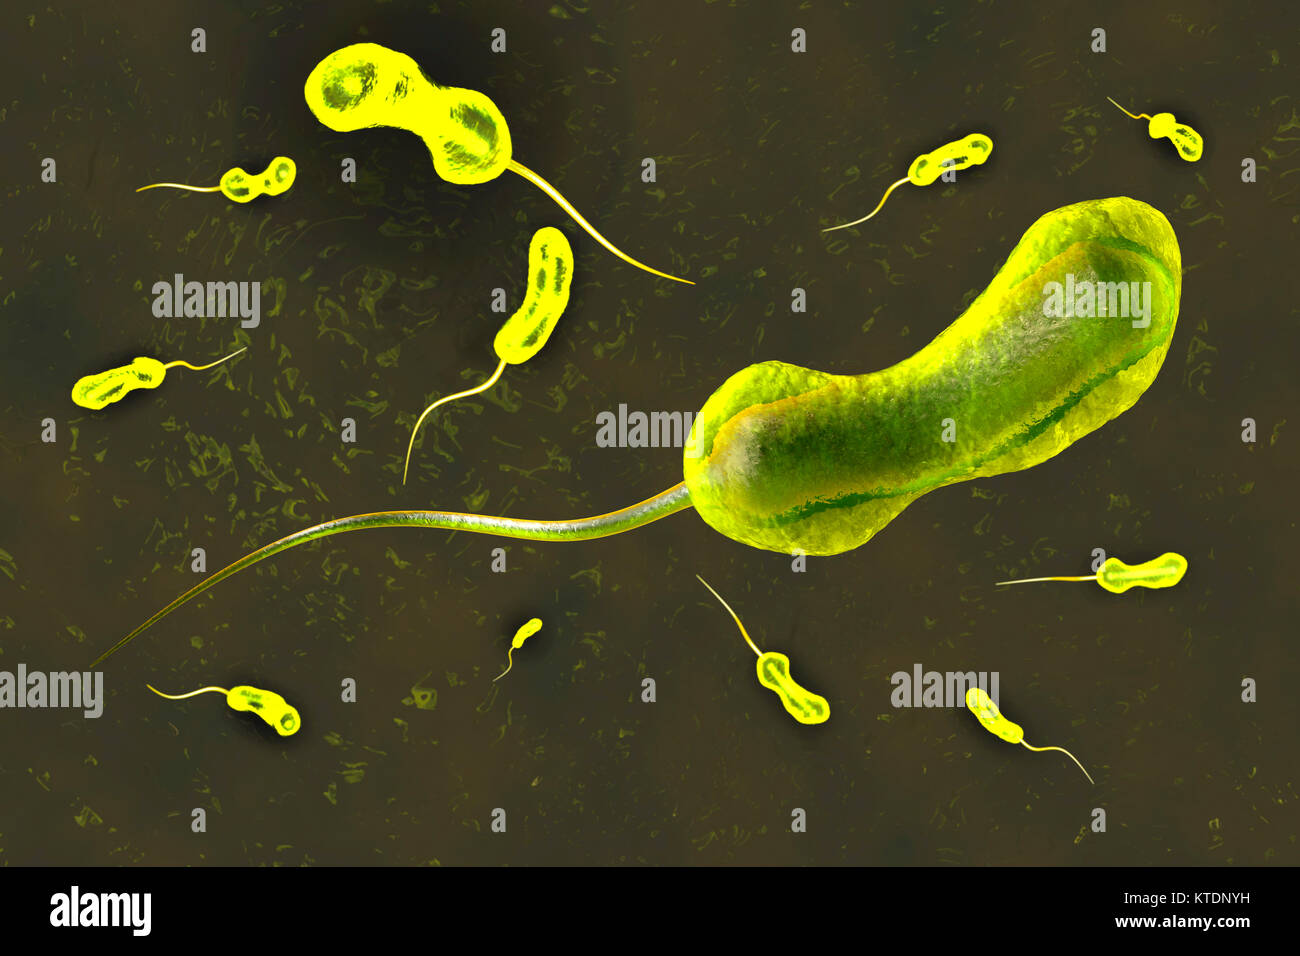 3D rendered Illustration of a anatomically correct convergence to a vibrio cholerae bacterium causing the famous cholera disease Stock Photo